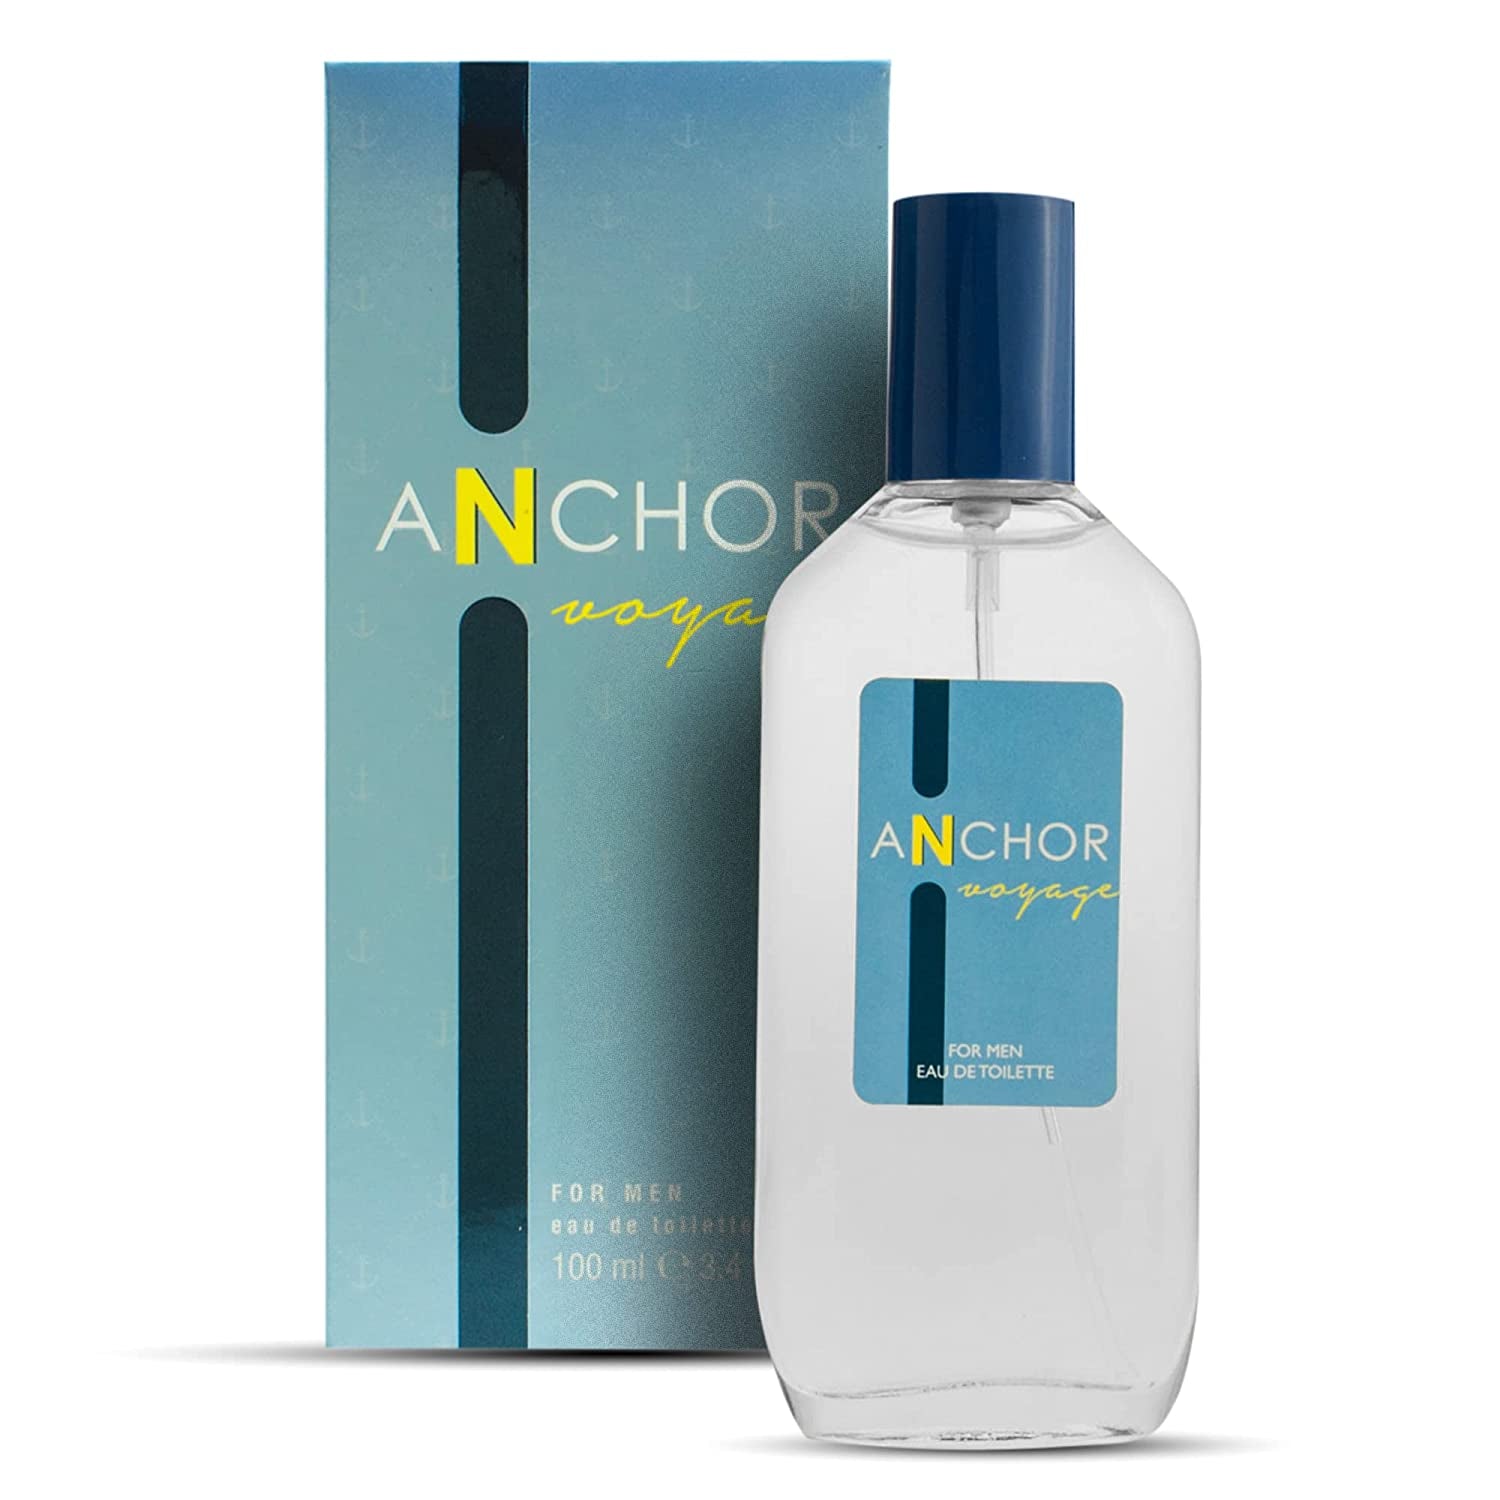 American Collection Mens Fragrance, Inspired by the Scent of Nautica's Voyage Cologne For Men, Eau de Parfum Natural Spray, Green Apple, Cedar, Airy And Crisp Scents 80 ML 2.75 Fl Oz